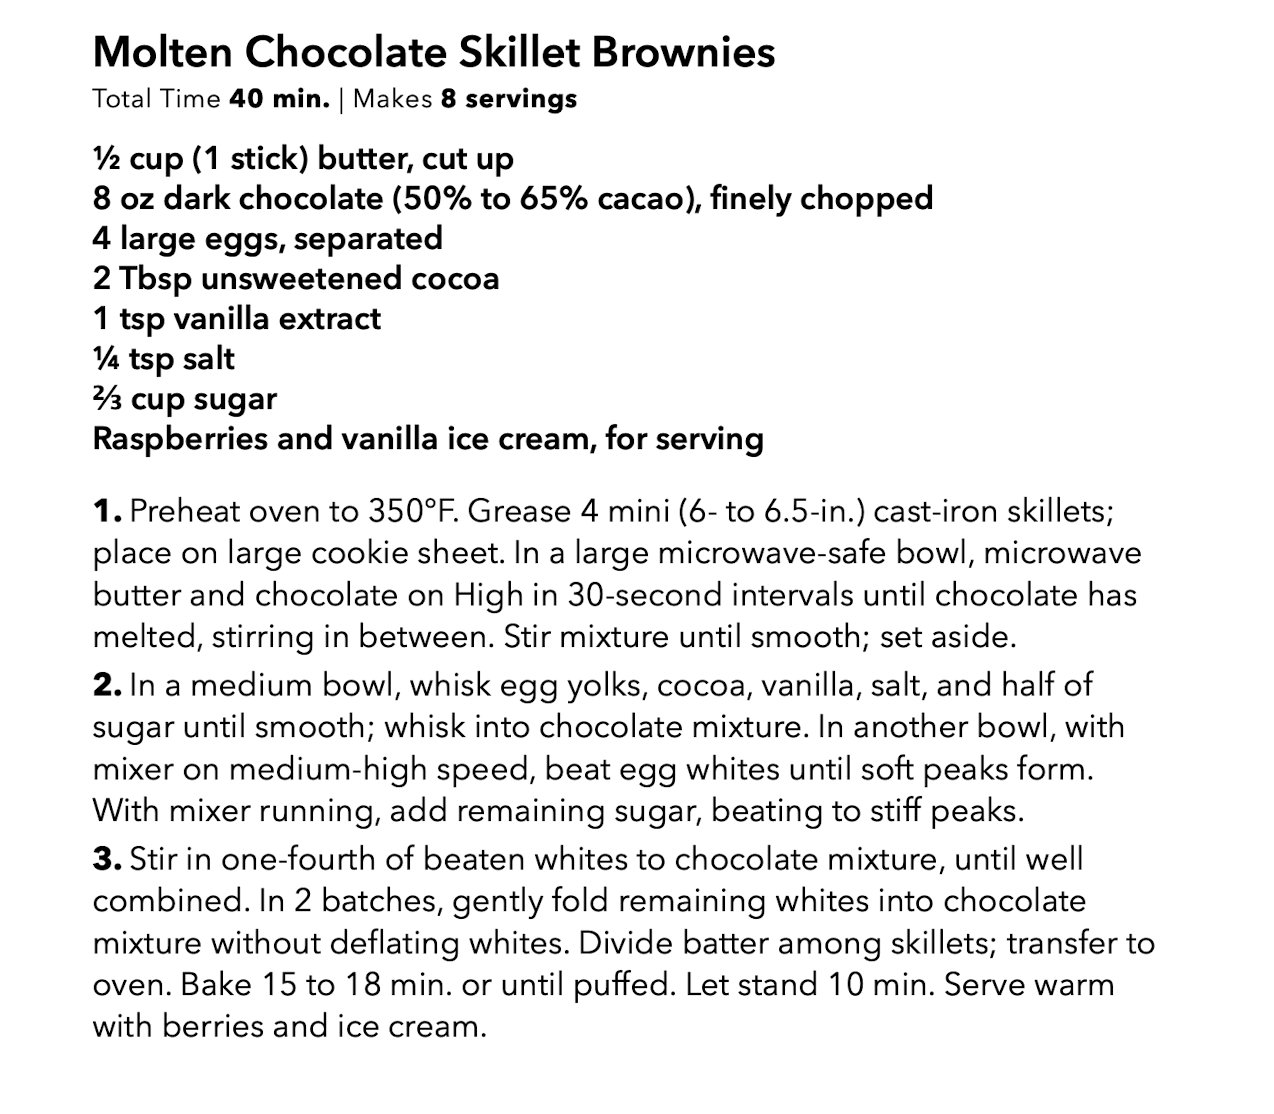 Recipe for Molten Chocolate Brownies